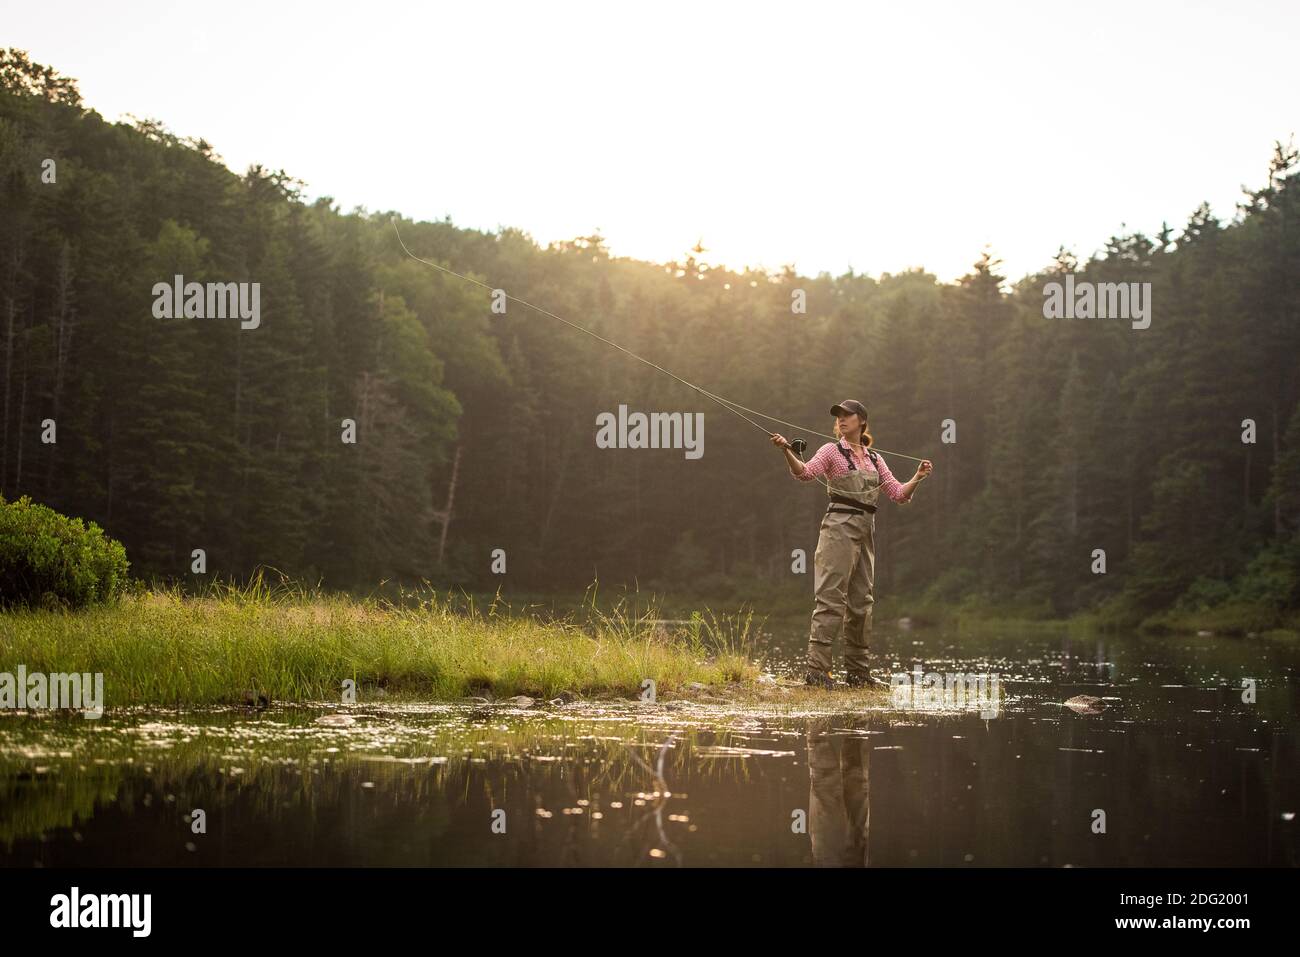 Woman angler fly-fishing in NH backcountry lake during afternoon light Stock Photo